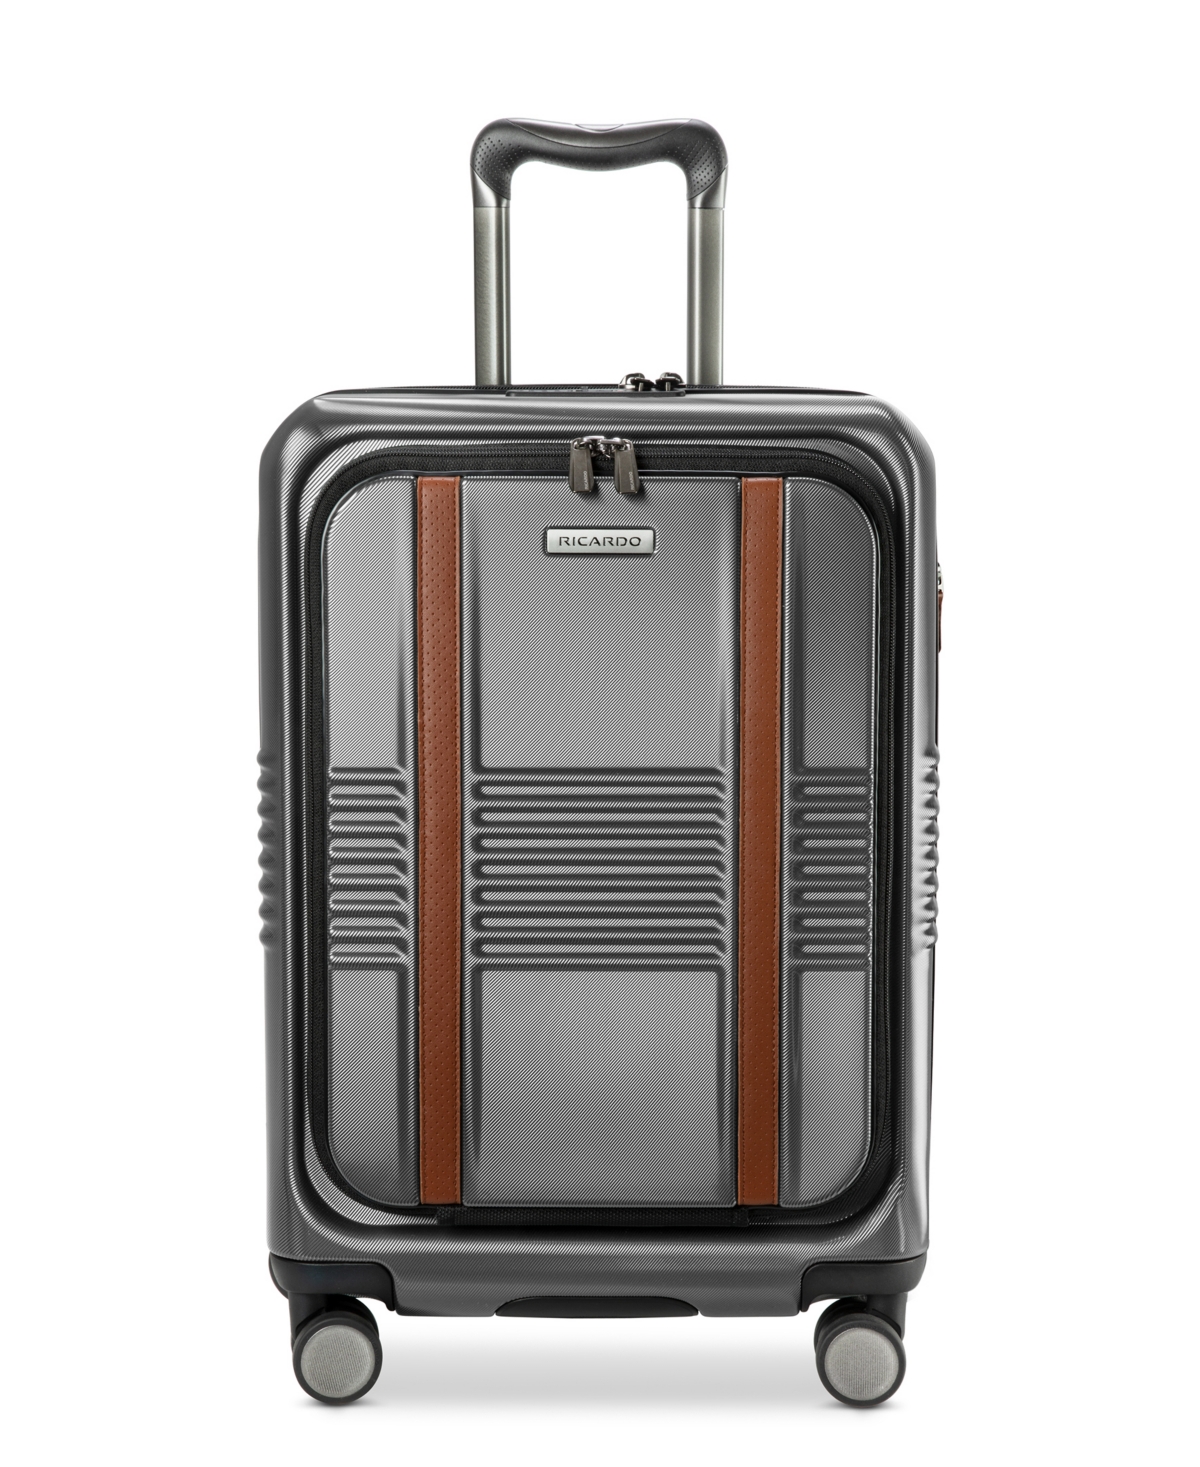 Ricardo Cabrillo 3.0 Hardside 21" Carry-on With Fastaccess Front Pocket In Graphite